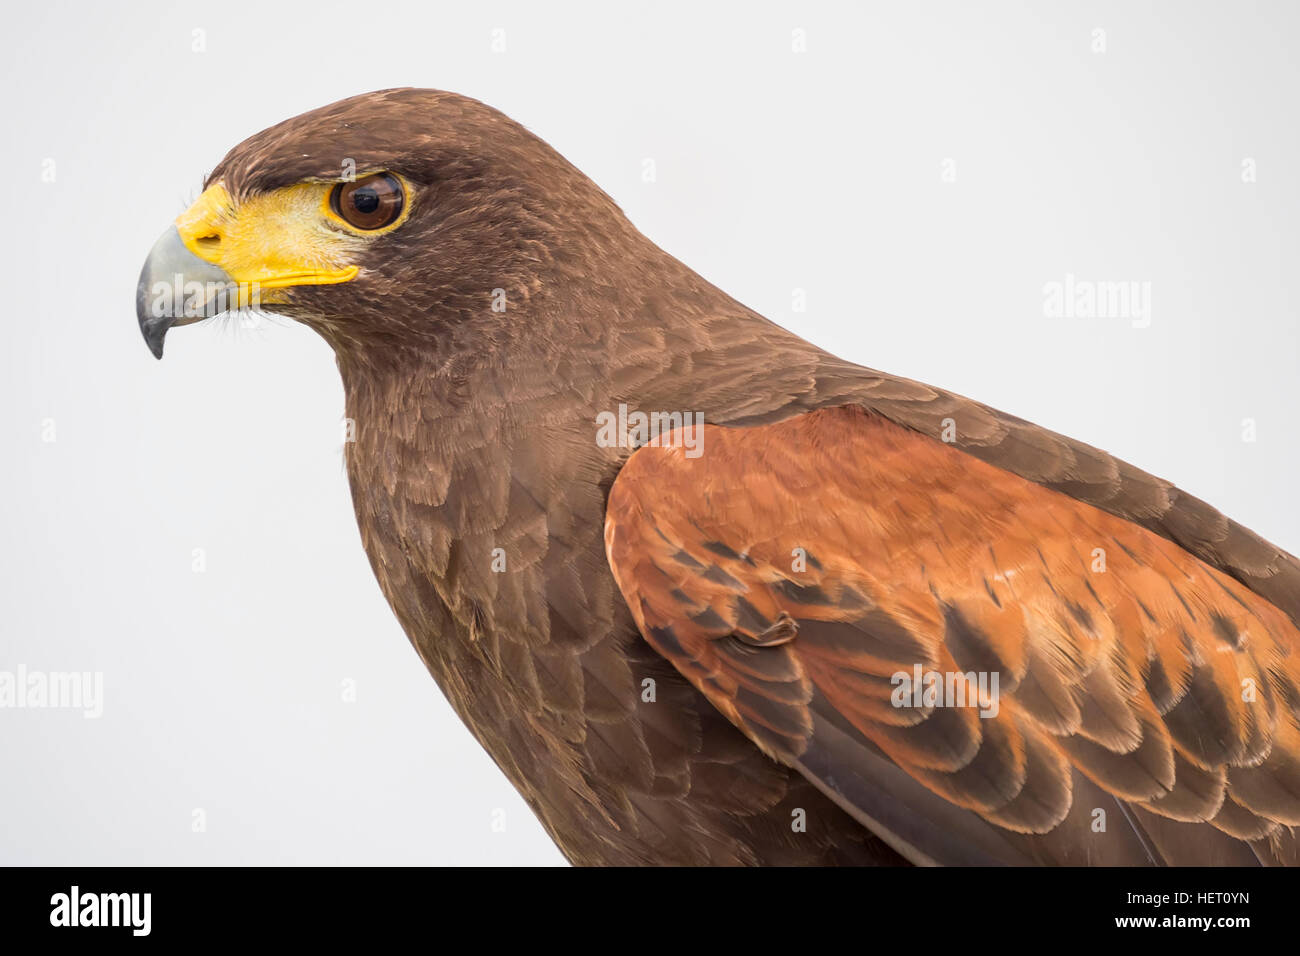 Eagle is a common name for many large birds of prey of the family Accipitridae. Stock Photo